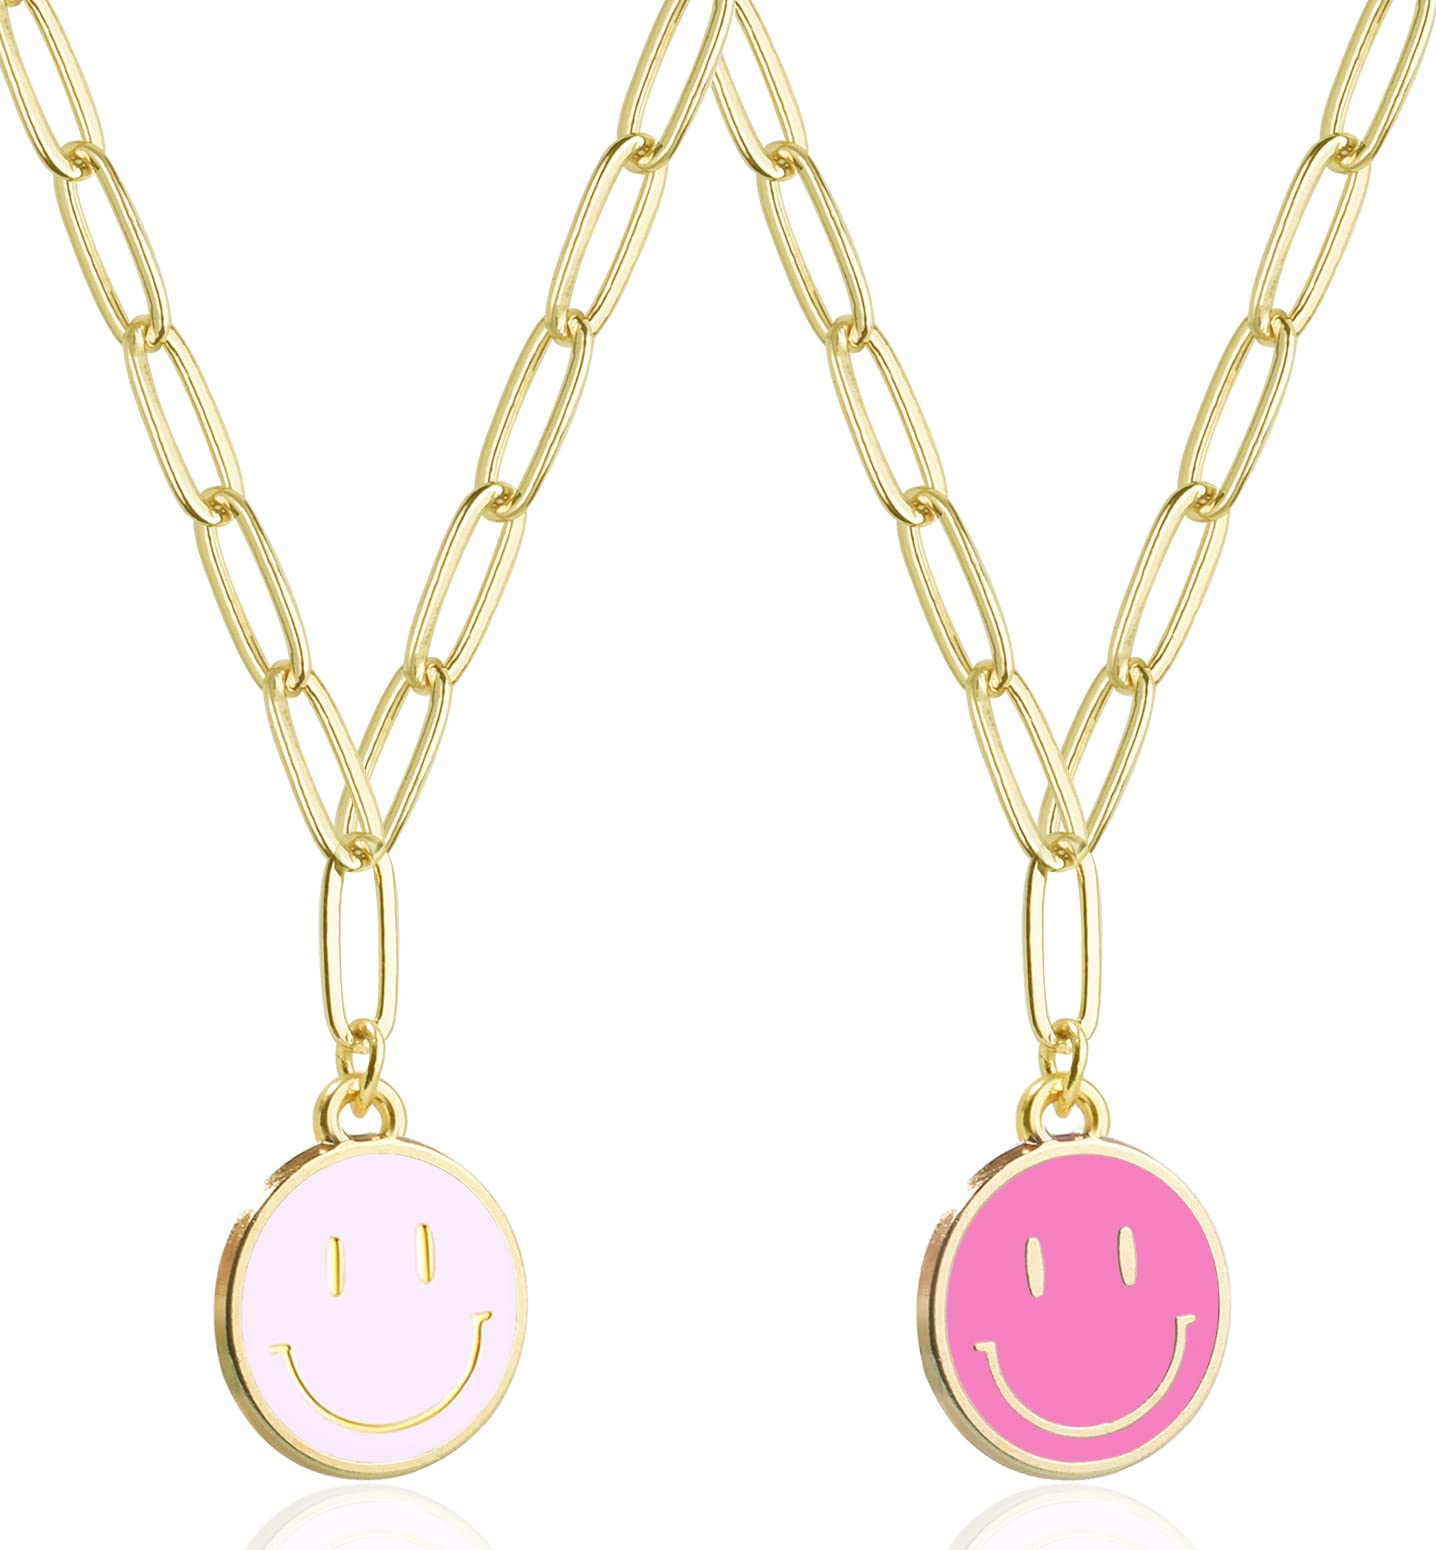 JSJOY Smiley Face Necklace 14K Gold Plated Paperclip Necklace Preppy Jewelry Y2K Trendy Necklace for Women Teen Girls